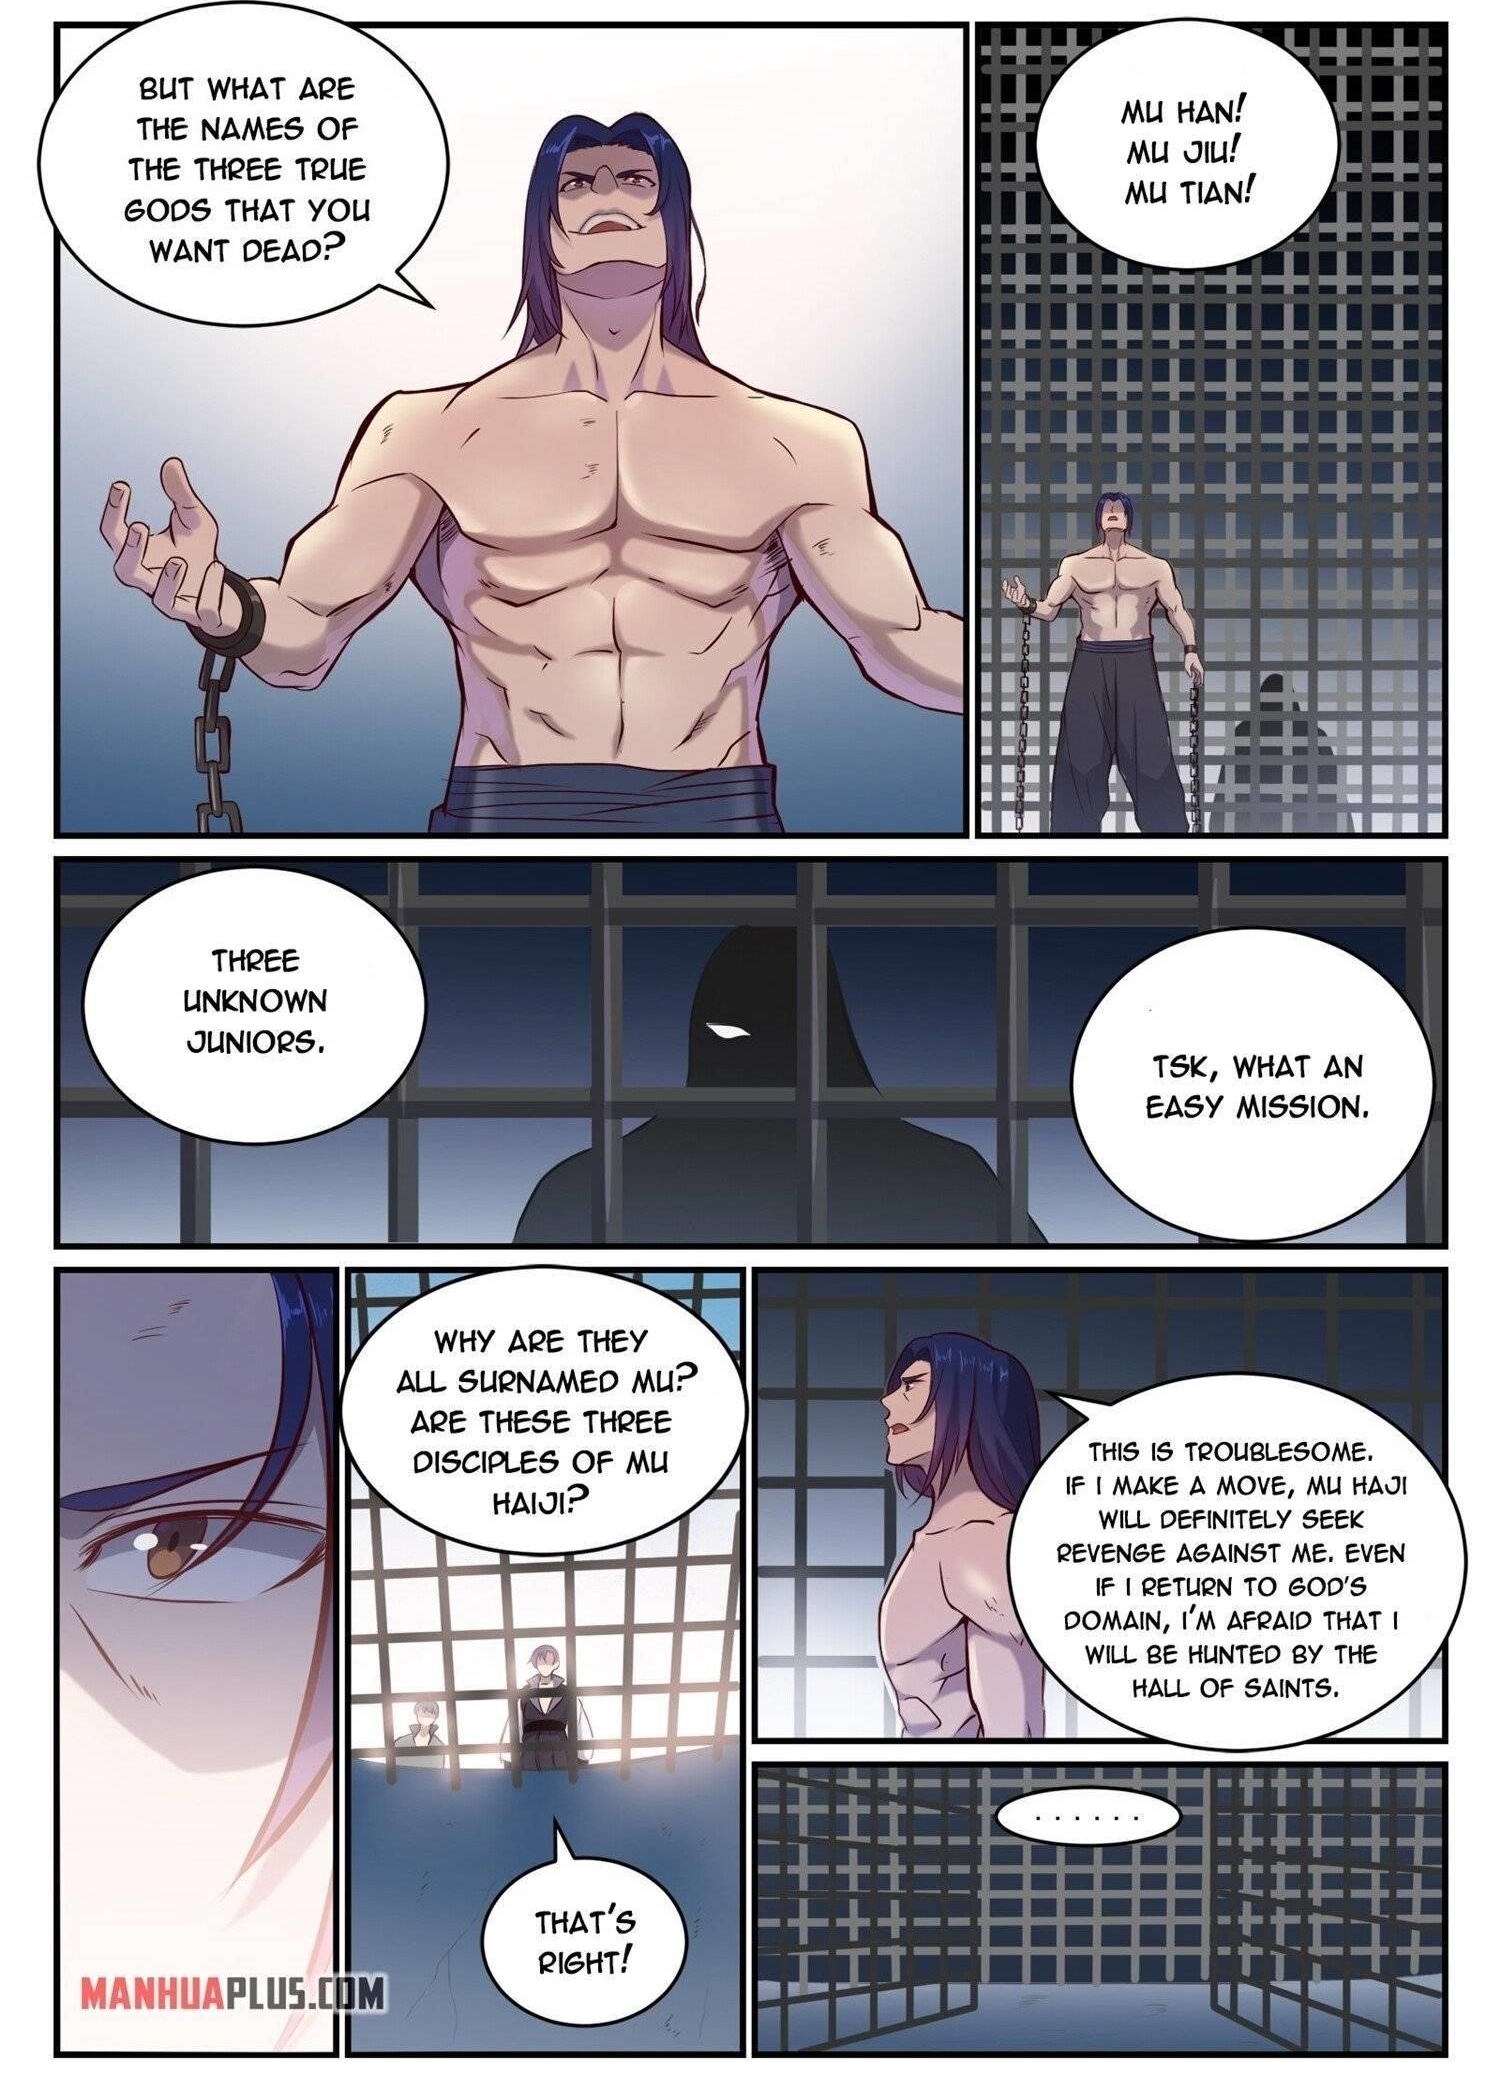 APOTHEOSIS Chapter 825 - Page 1